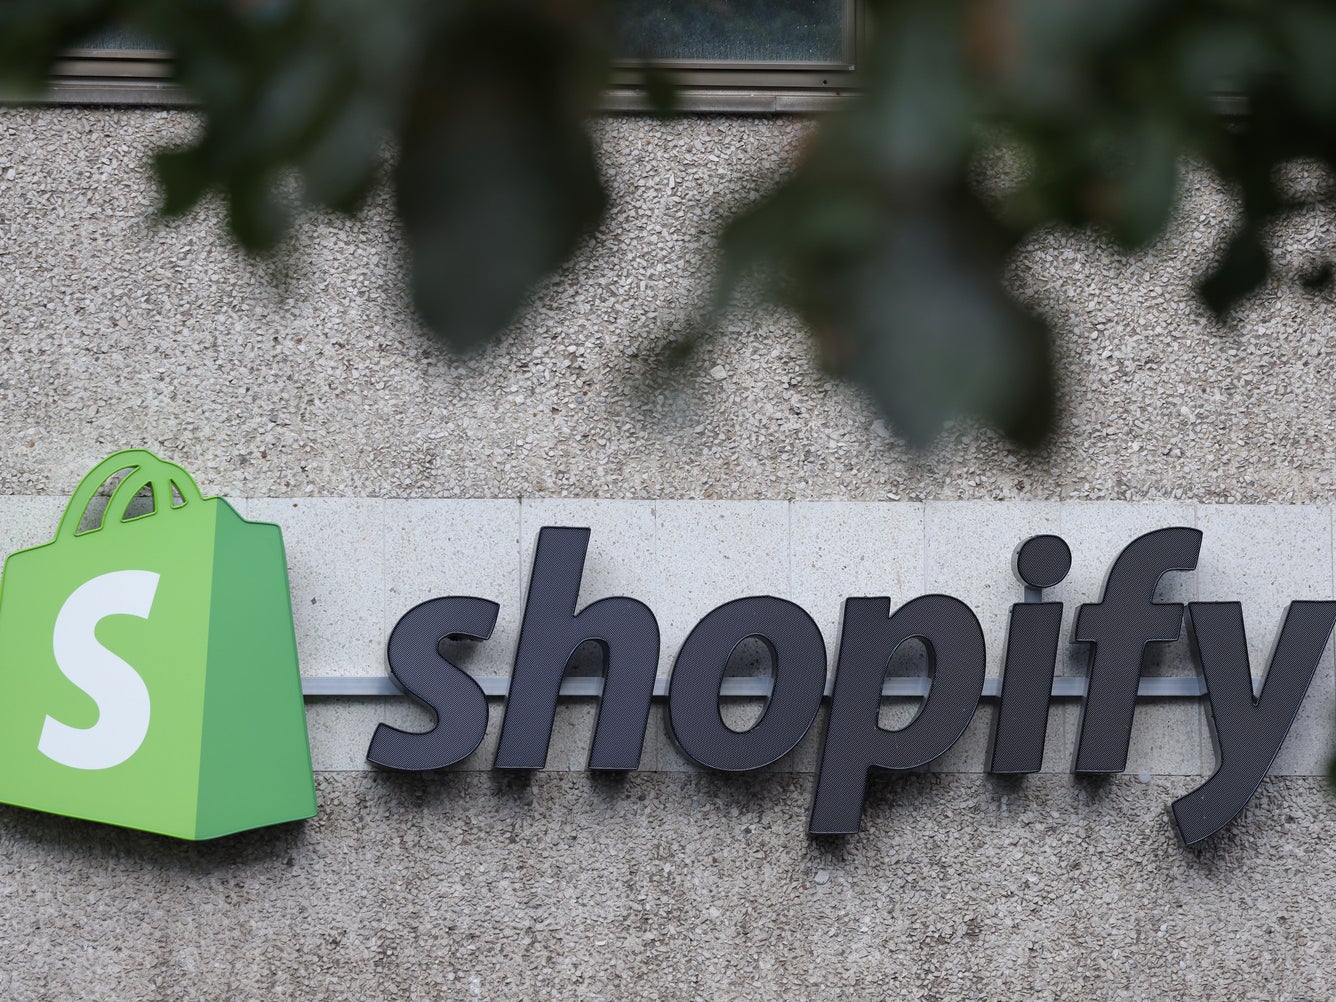 Shopify: Same Moat, New Verticals, Almost A Buy (NYSE:SHOP)